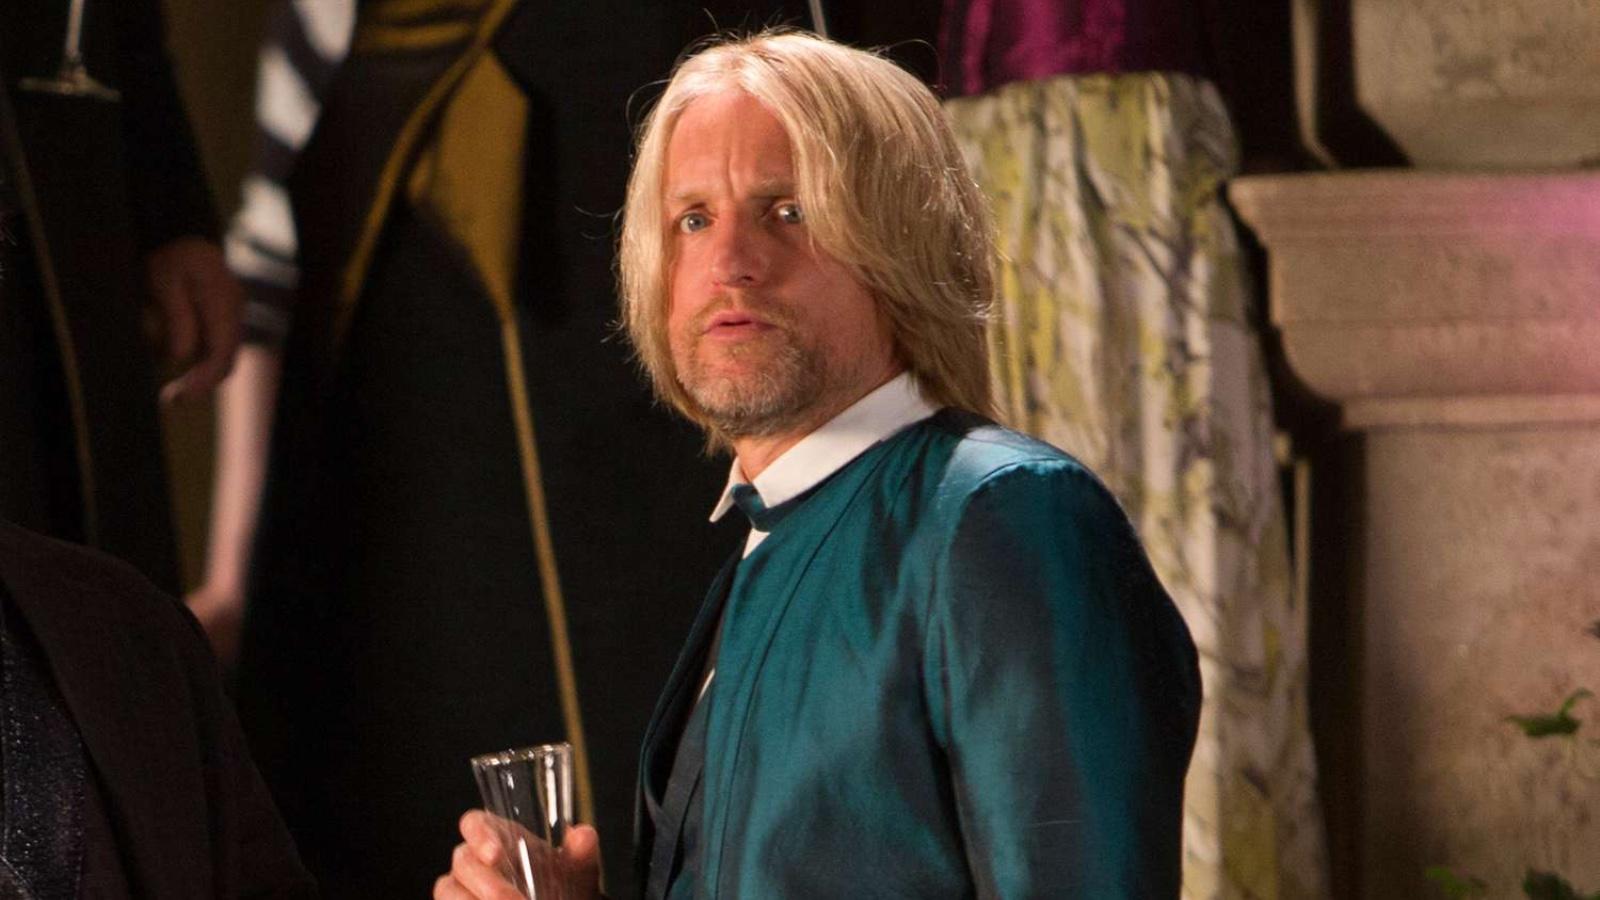 Woody Harrelson as Haymitch in The Hunger Games movie.